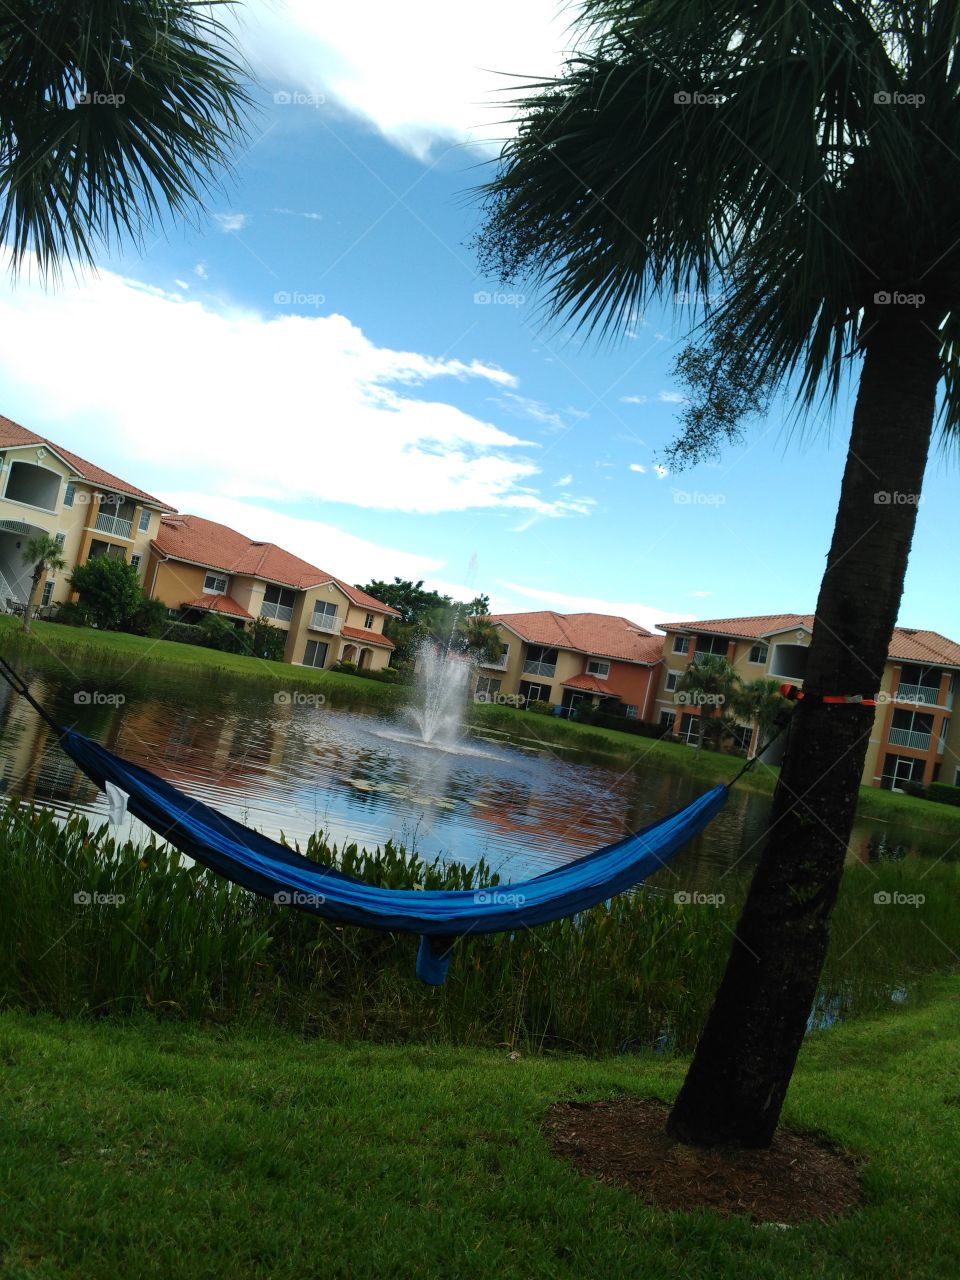 hammocks are where my lazy bum wants to have a seat!